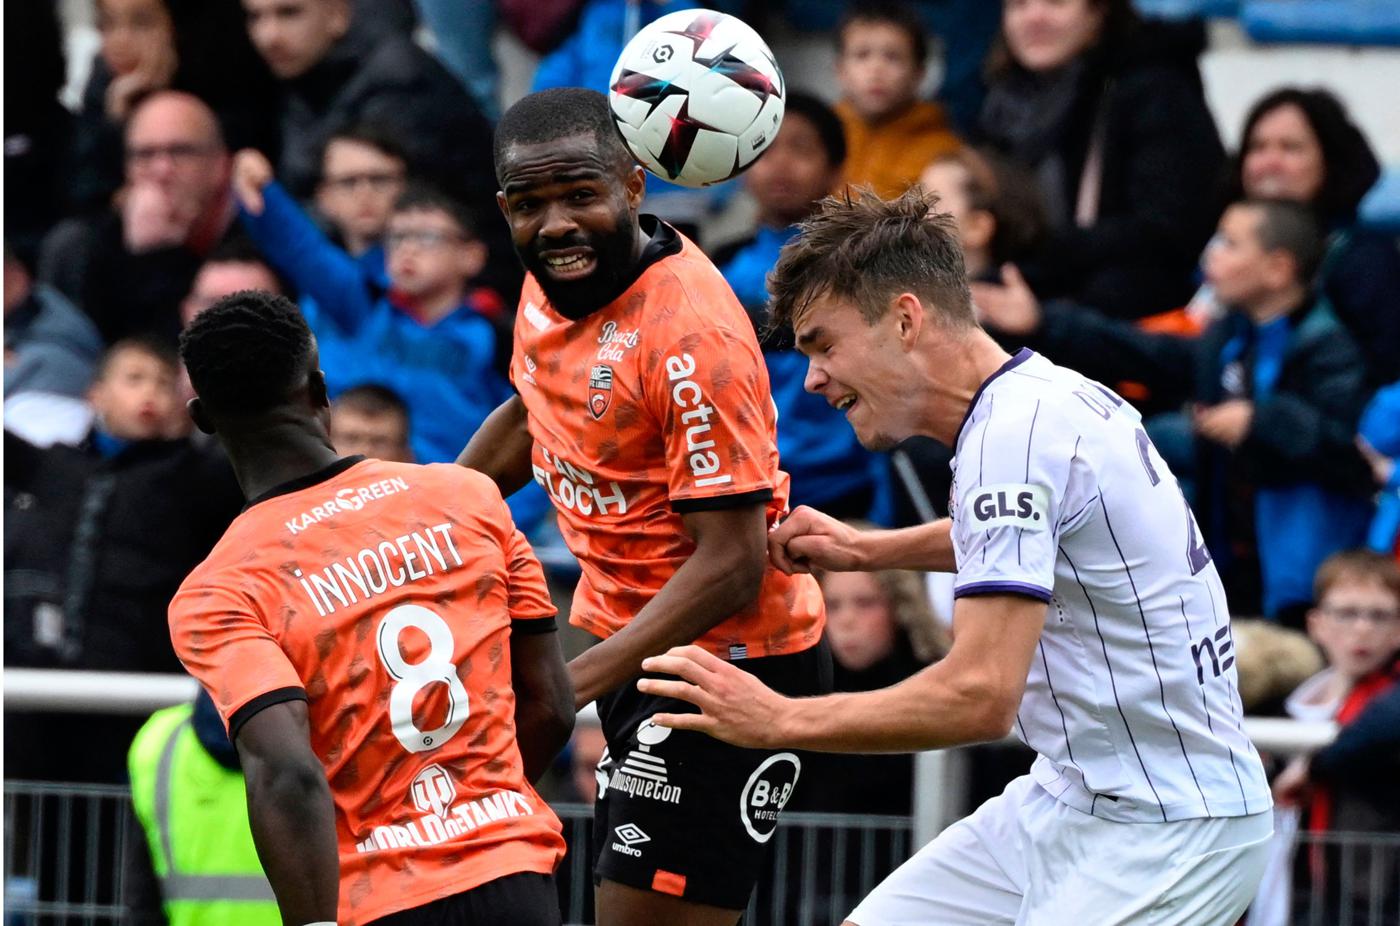 Lorient - Toulouse - 0-1. French Championship, round 32. Match review, statistics